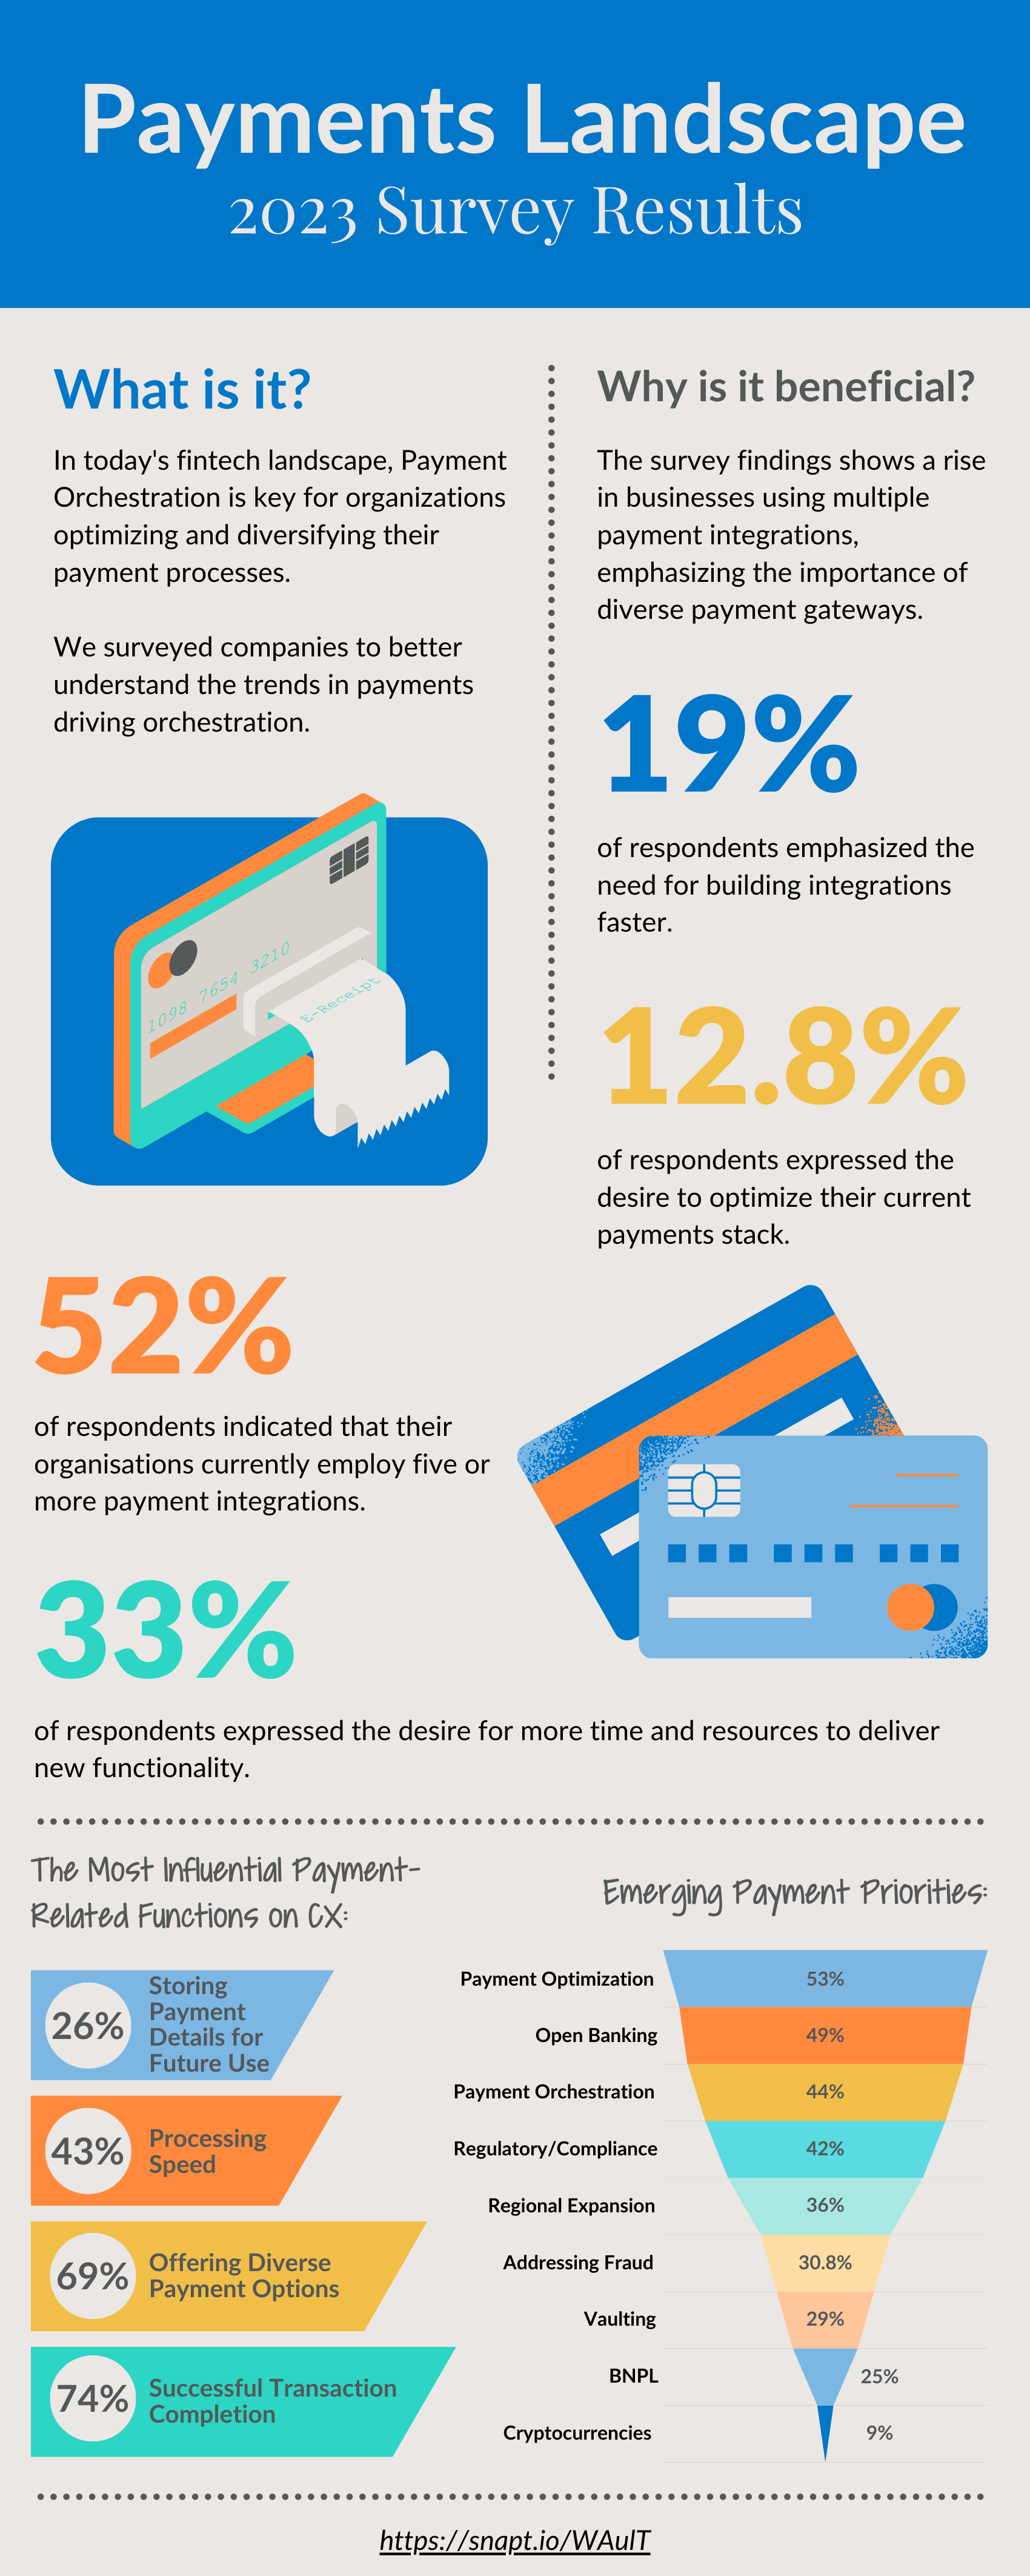 Spreedly and Paypers, Payments Landscape 2023 Survey Results